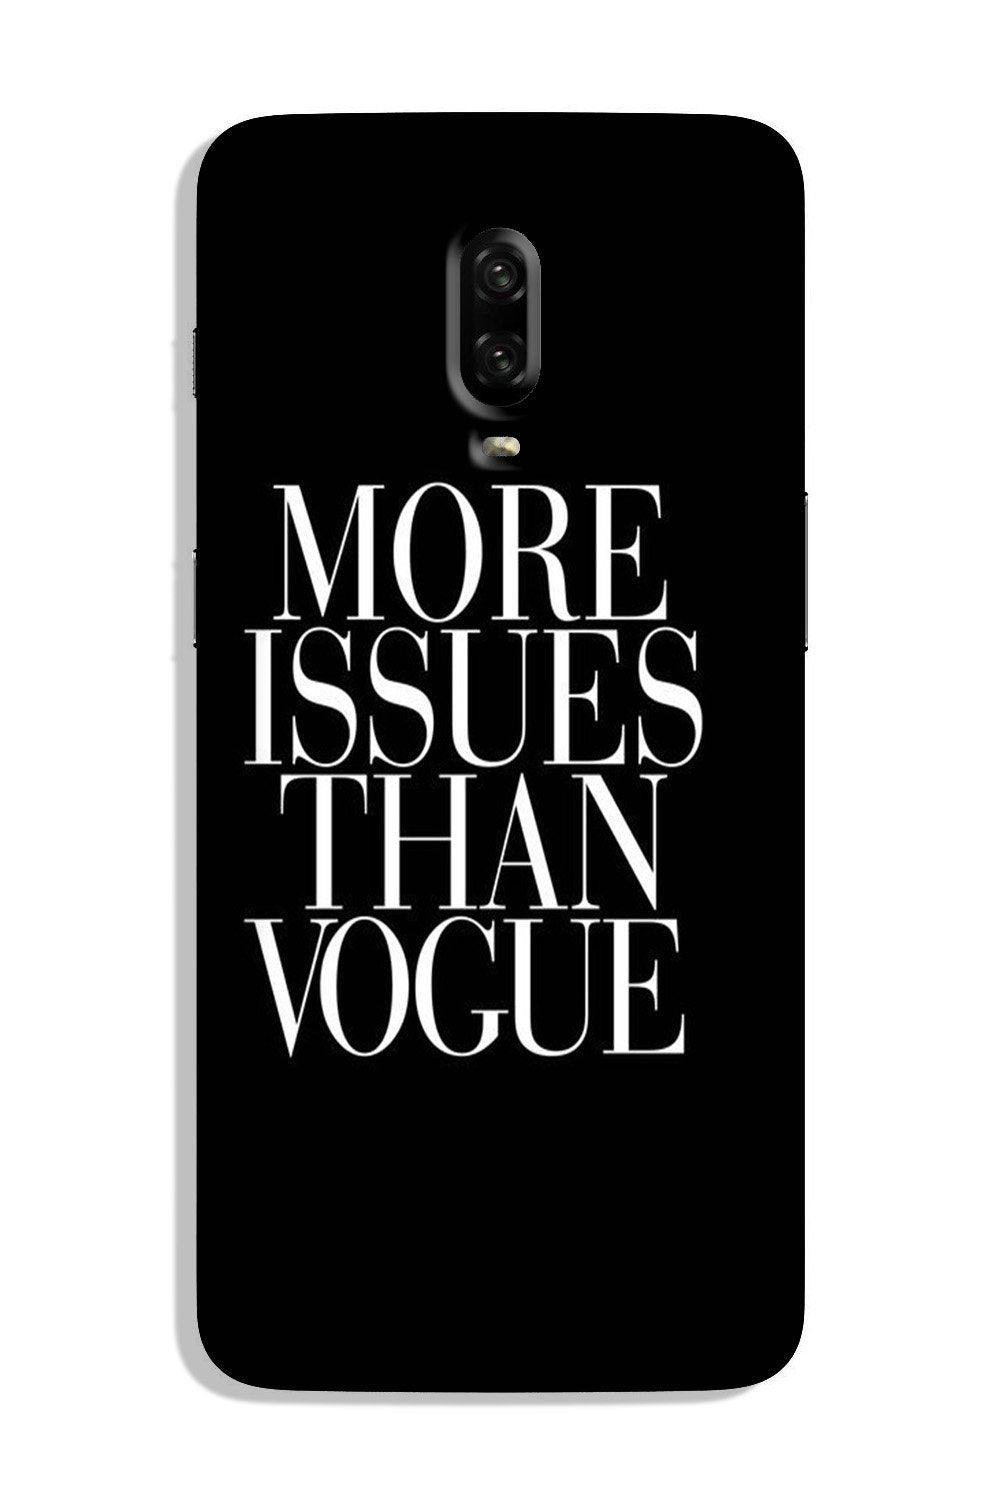 More Issues than Vague Case for OnePlus 7